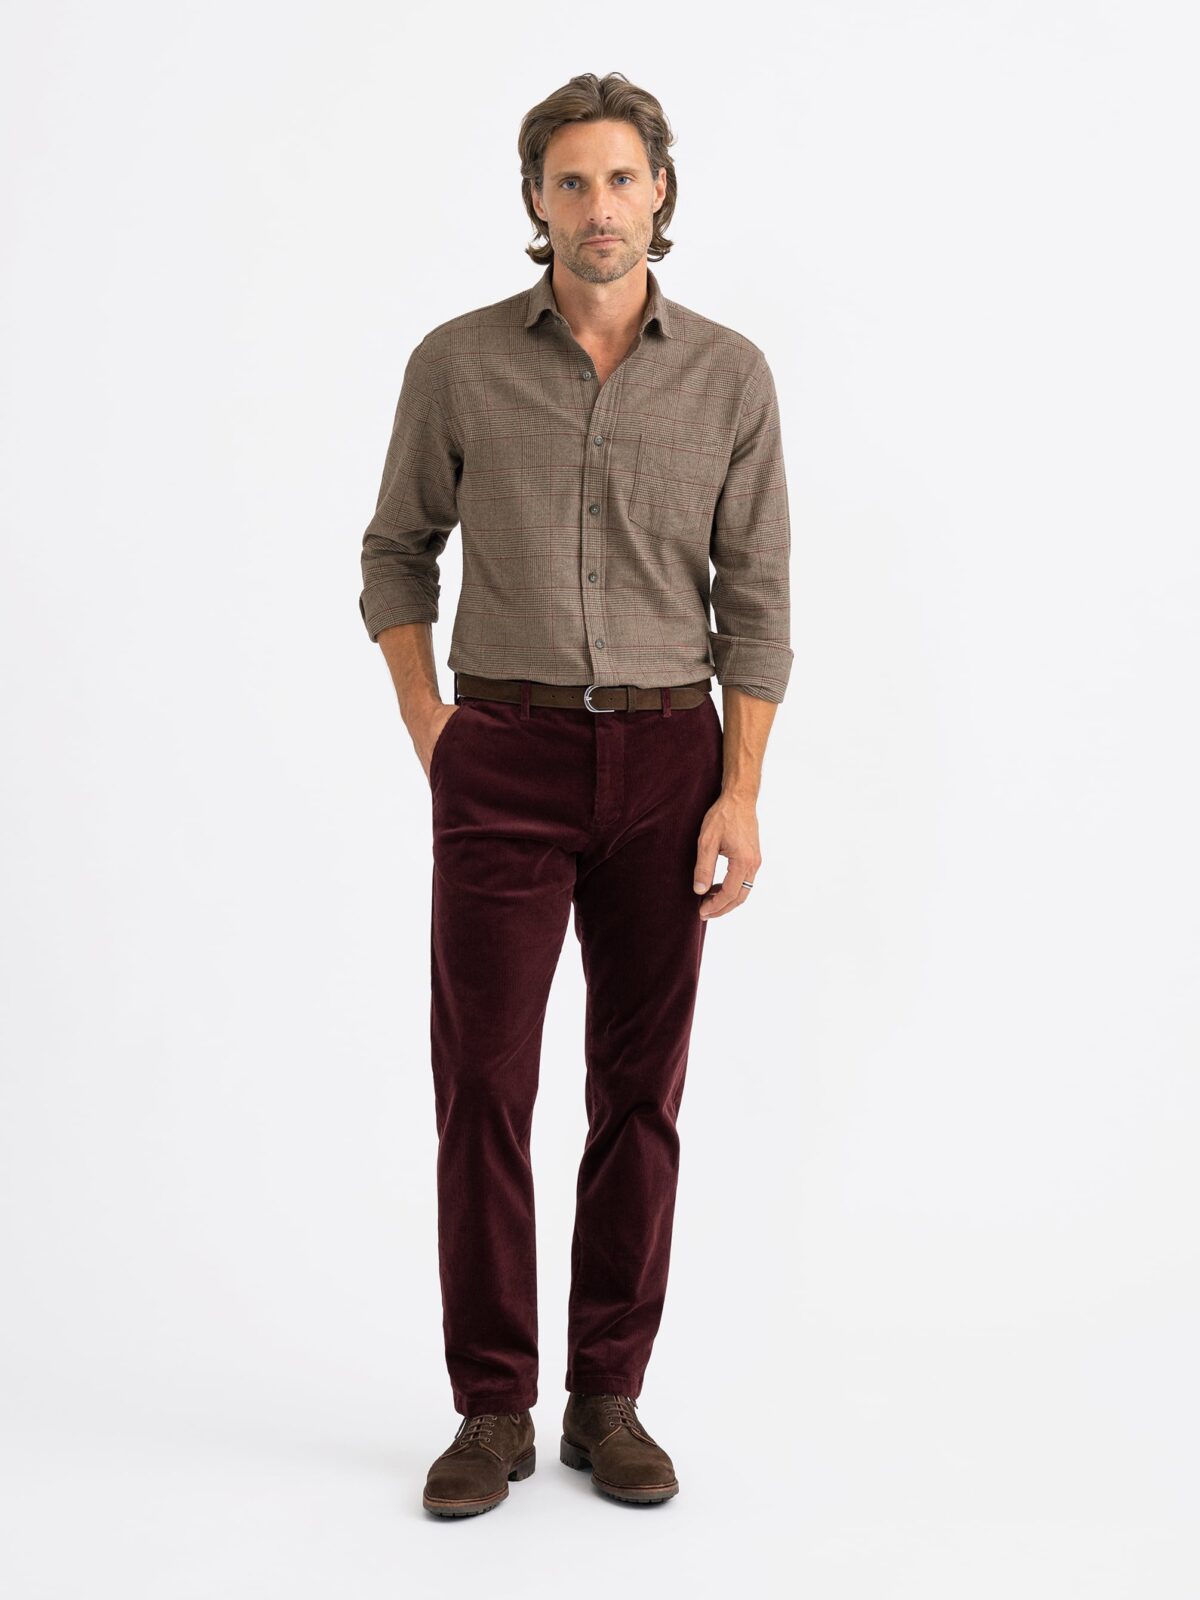 Buy Alimens & Gentle Men's Corduroy Straight Fit Flat Front Casual Pant- Brown 02, 32W x 32L at Amazon.in